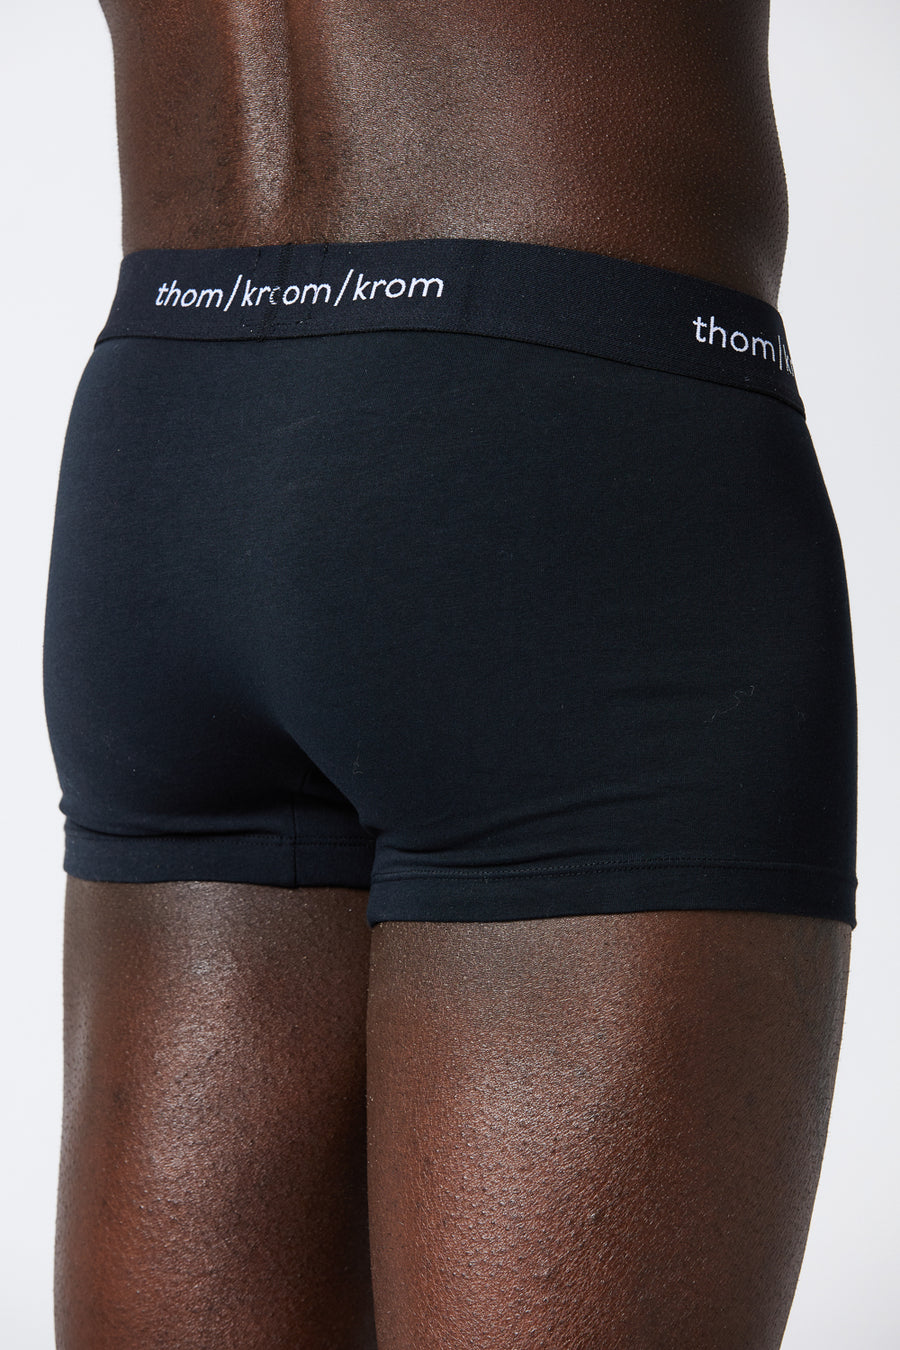 Buy the Thom Krom TRUNK1 in Black at Intro. Spend £50 for free UK delivery. Official stockists. We ship worldwide.